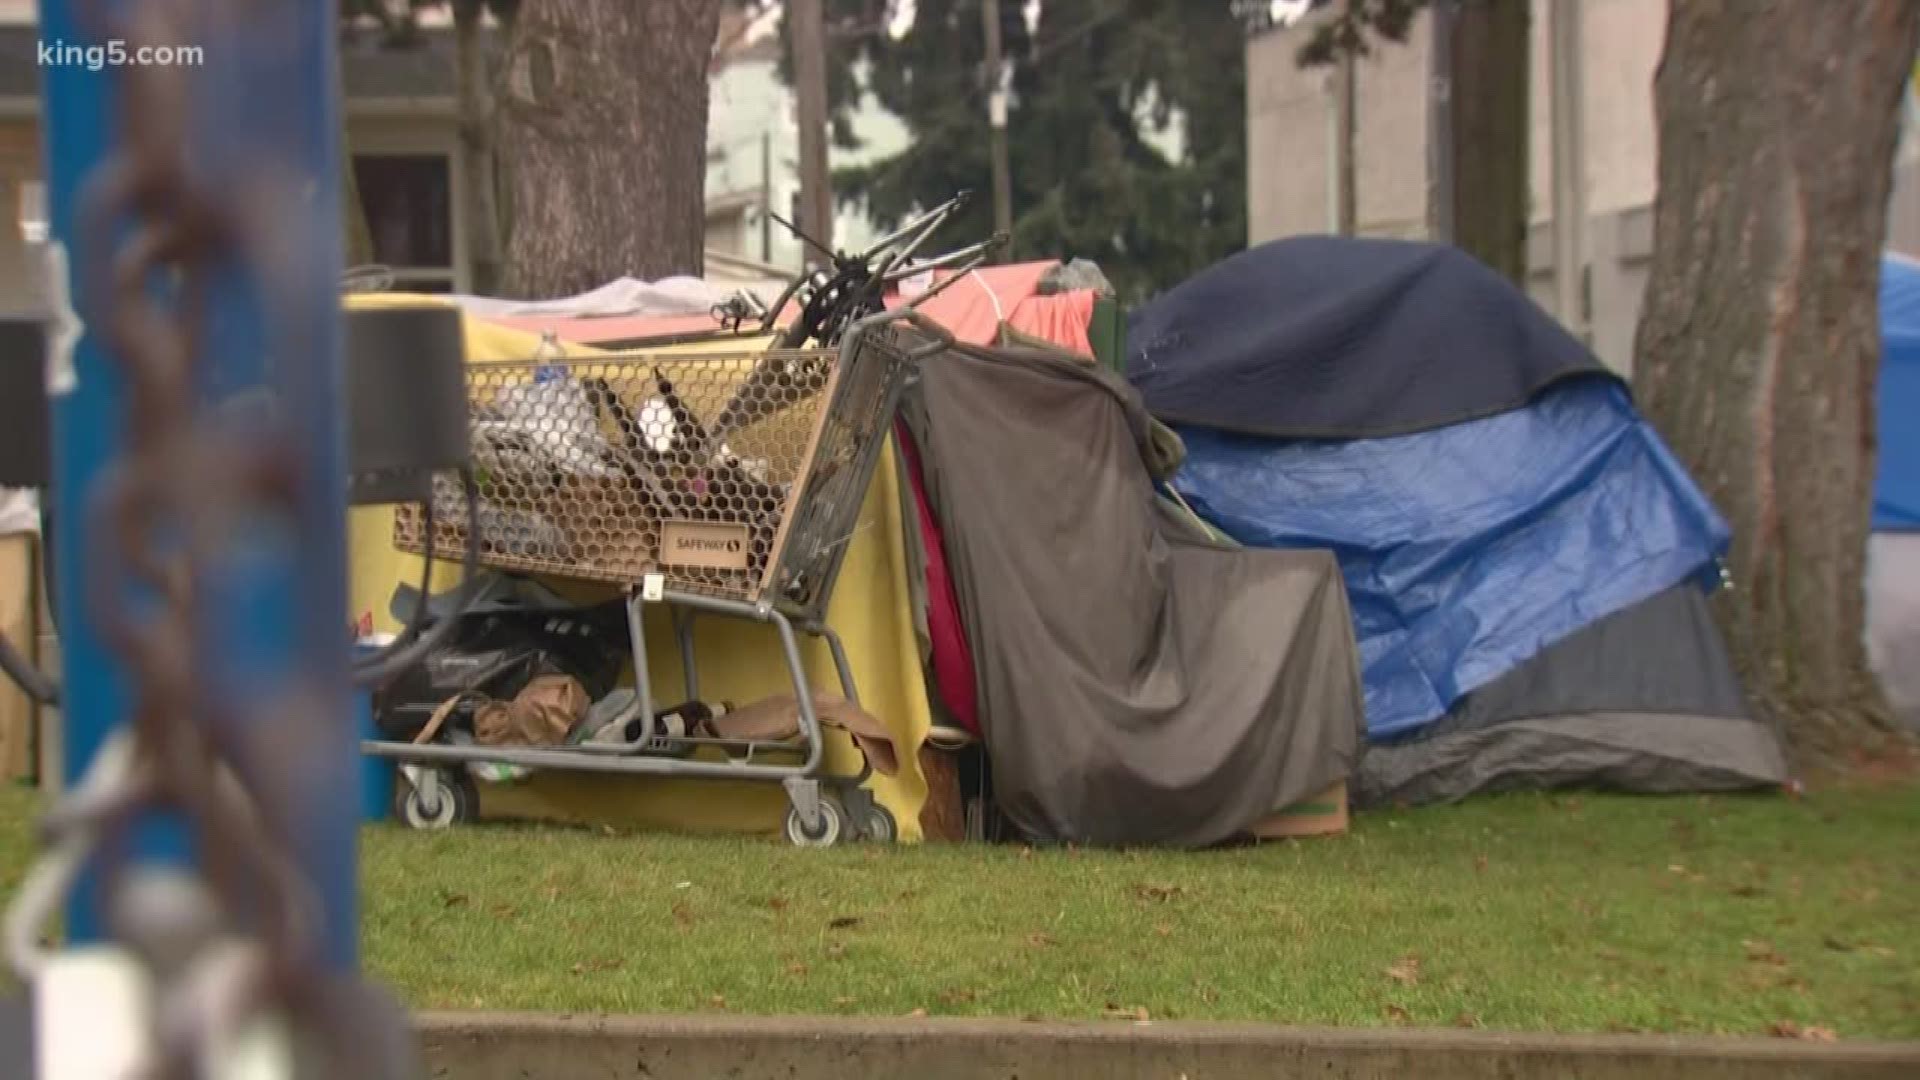 The city hopes to move 35 people from People's Park into microhomes.